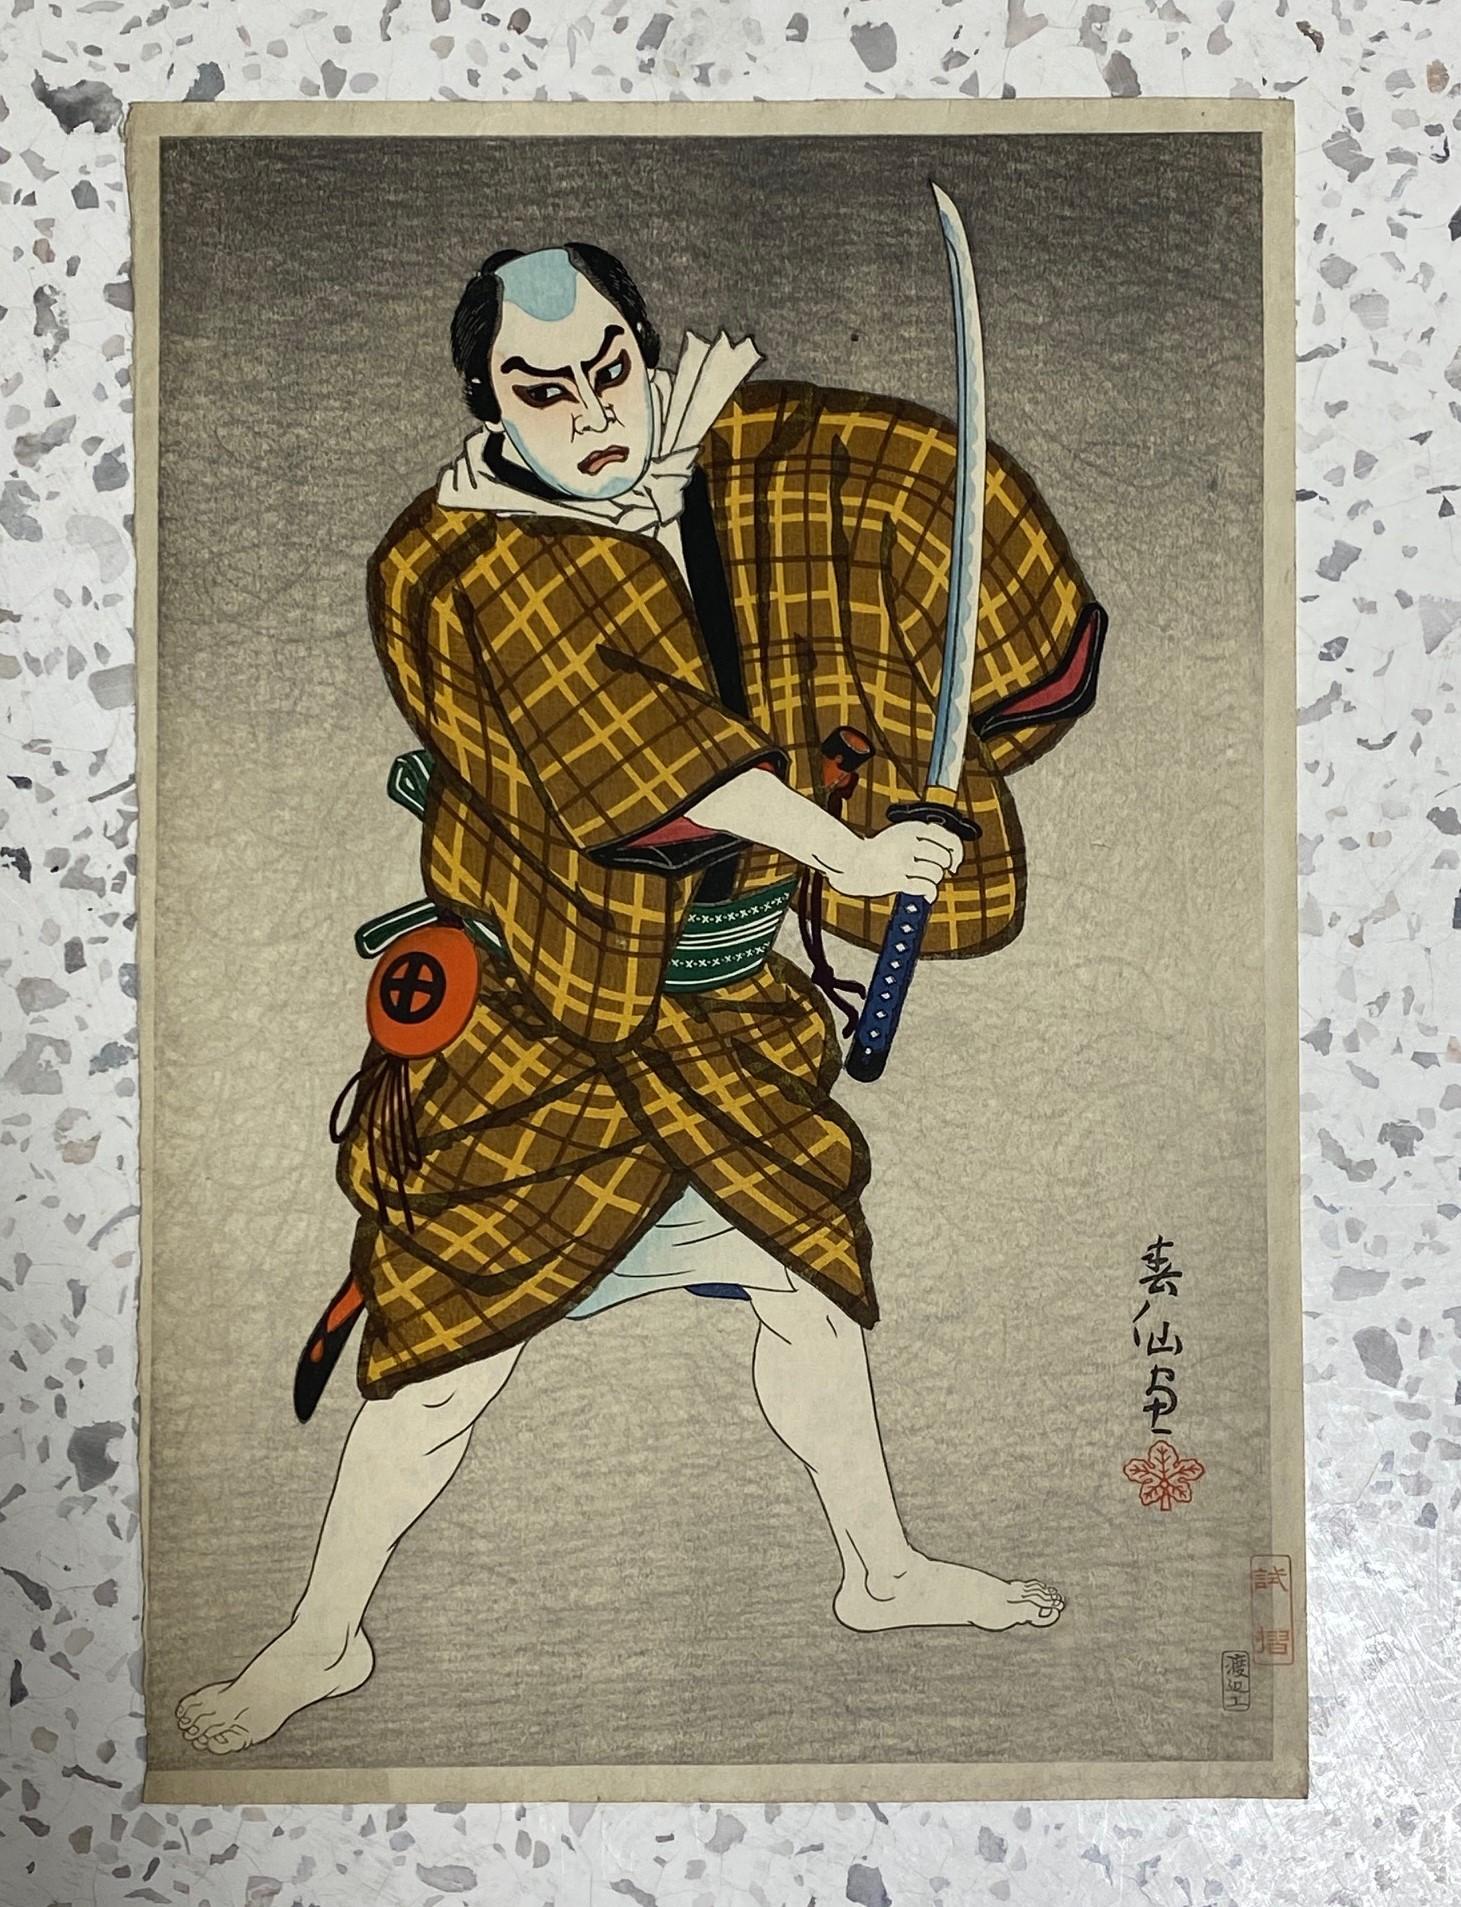 A wonderful and quite rare woodblock print by famed Japanese artist/ master printmaker Natori Shunsen of well-known Japanese actor Onoe Kikugoro VI in the drama 